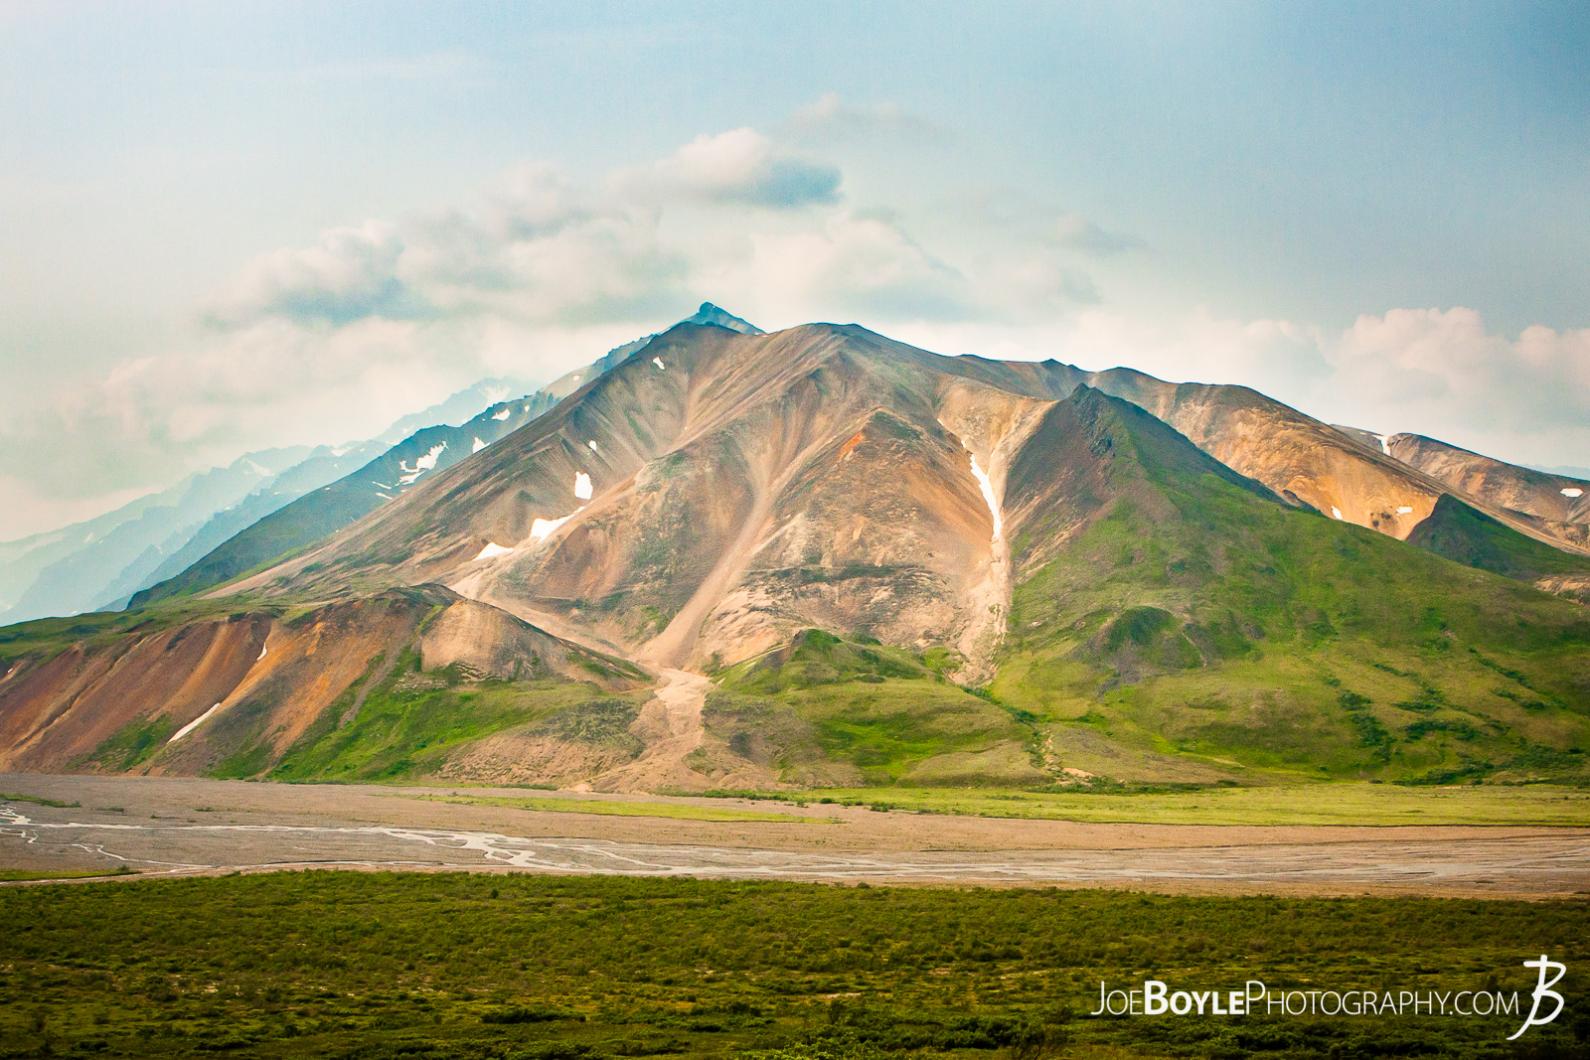 Here is a photo of a mountain and a river in Denali National Park. The river is the boundary line between grid 6 and grid 7. We eventually crossed the river and kept our adventure going!